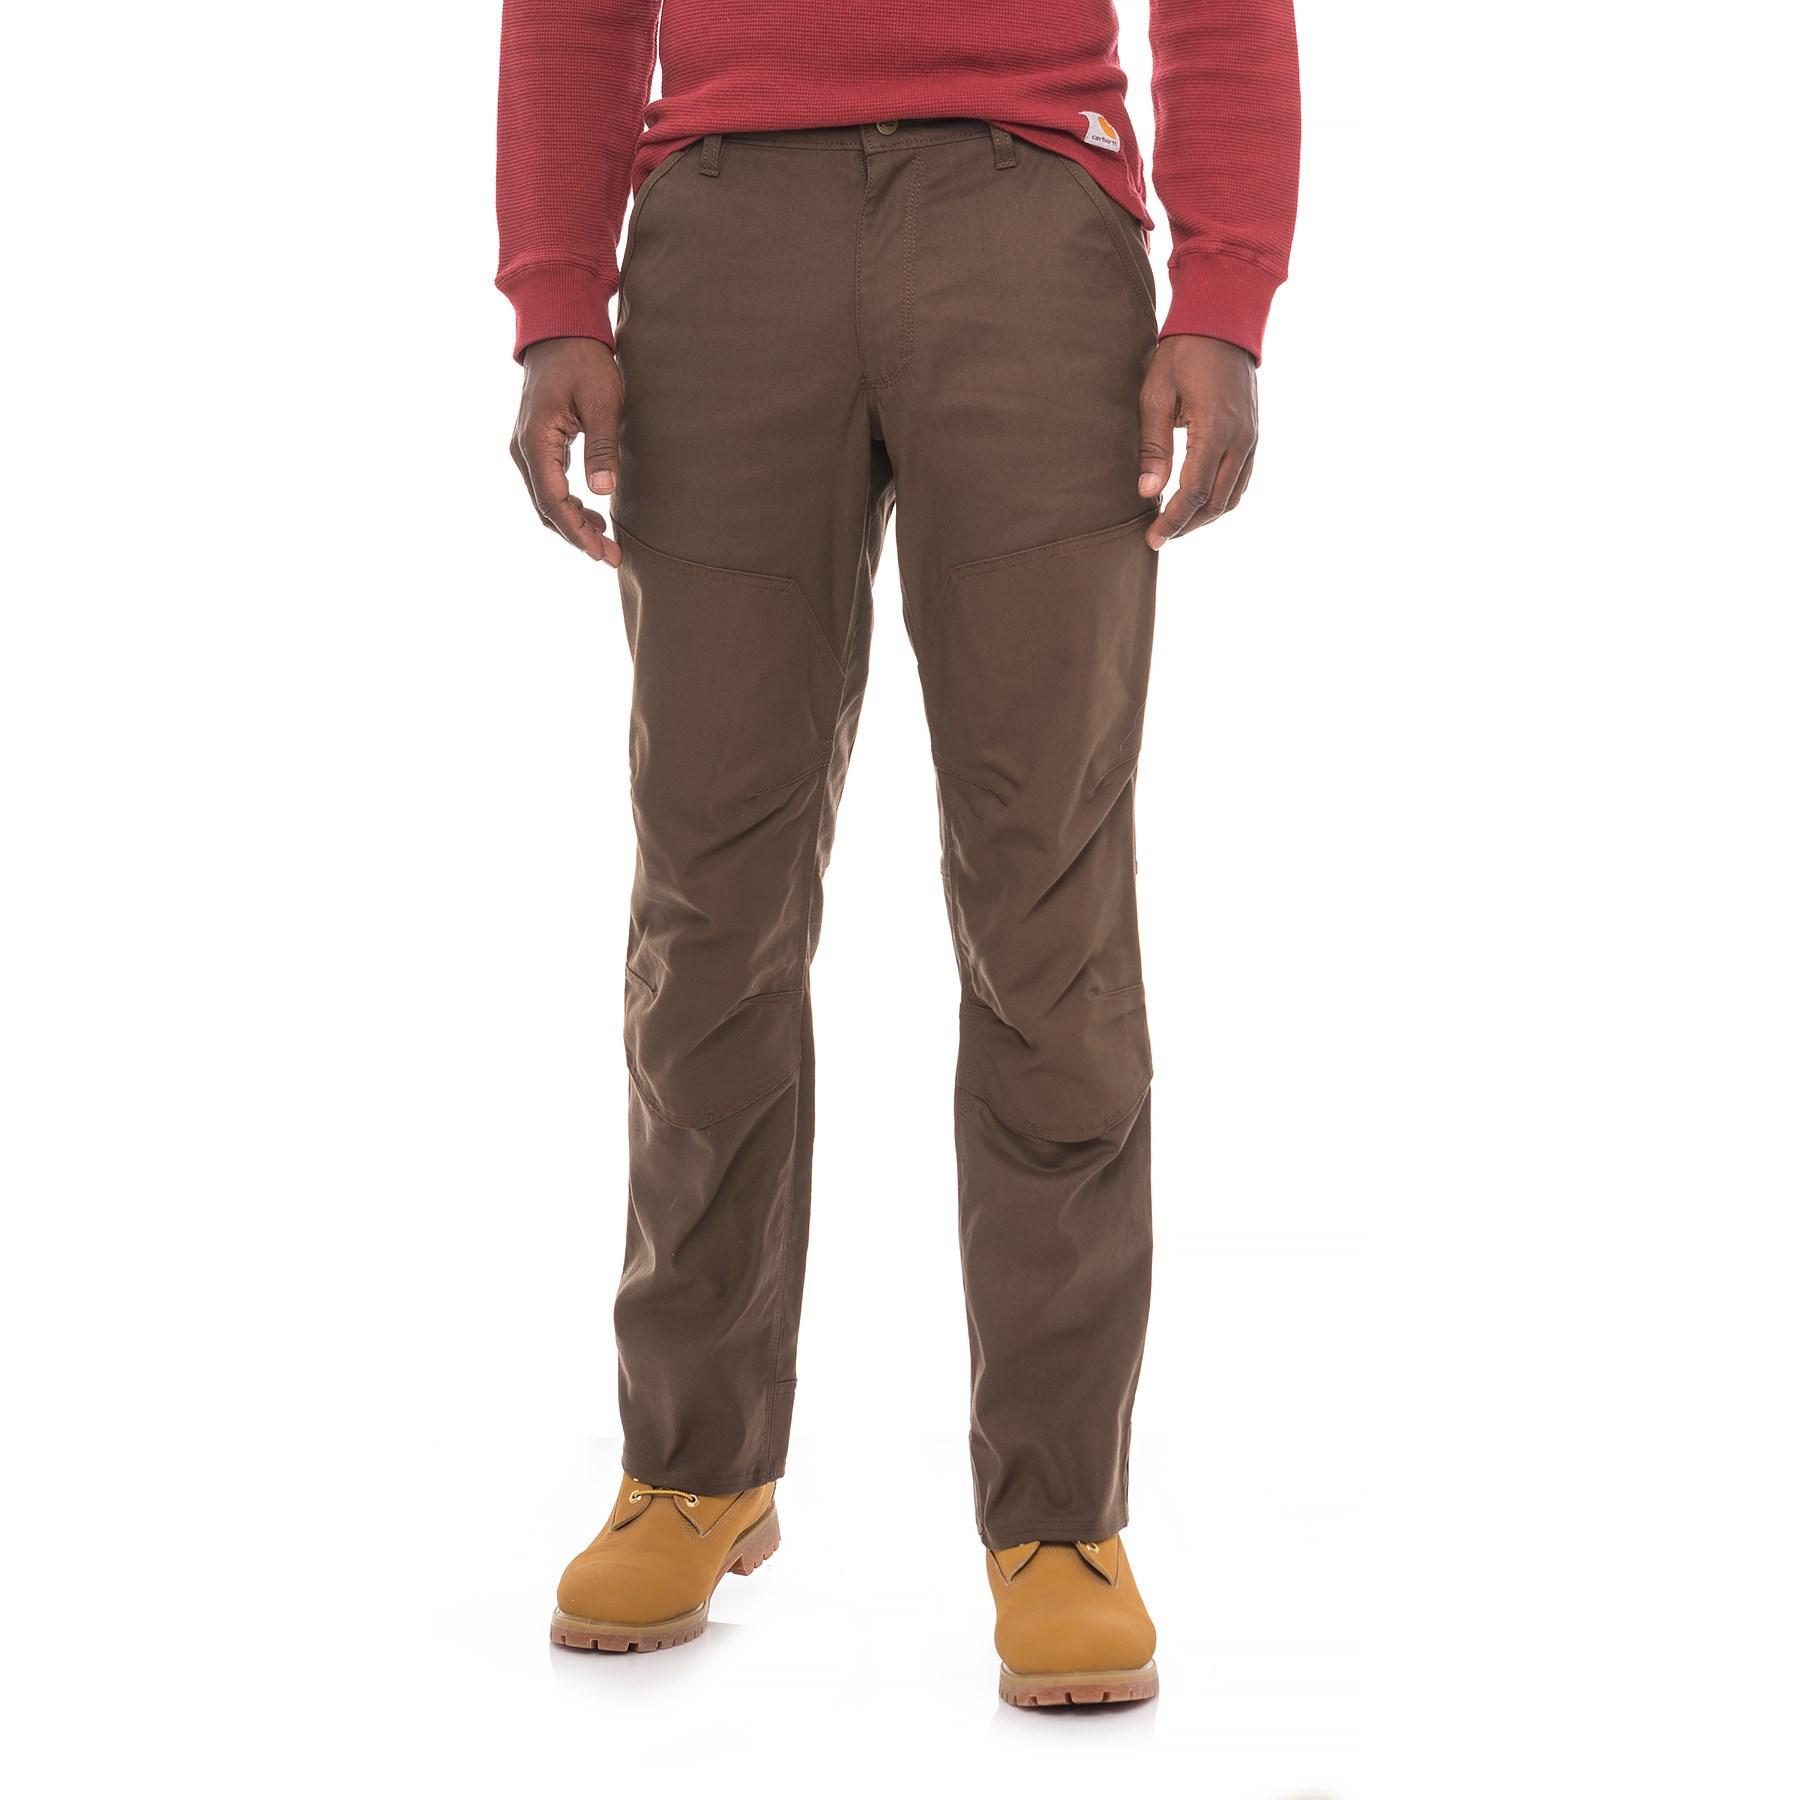 Lyst - Timberland Gridflex Canvas Work Pants (for Men) in Brown for Men